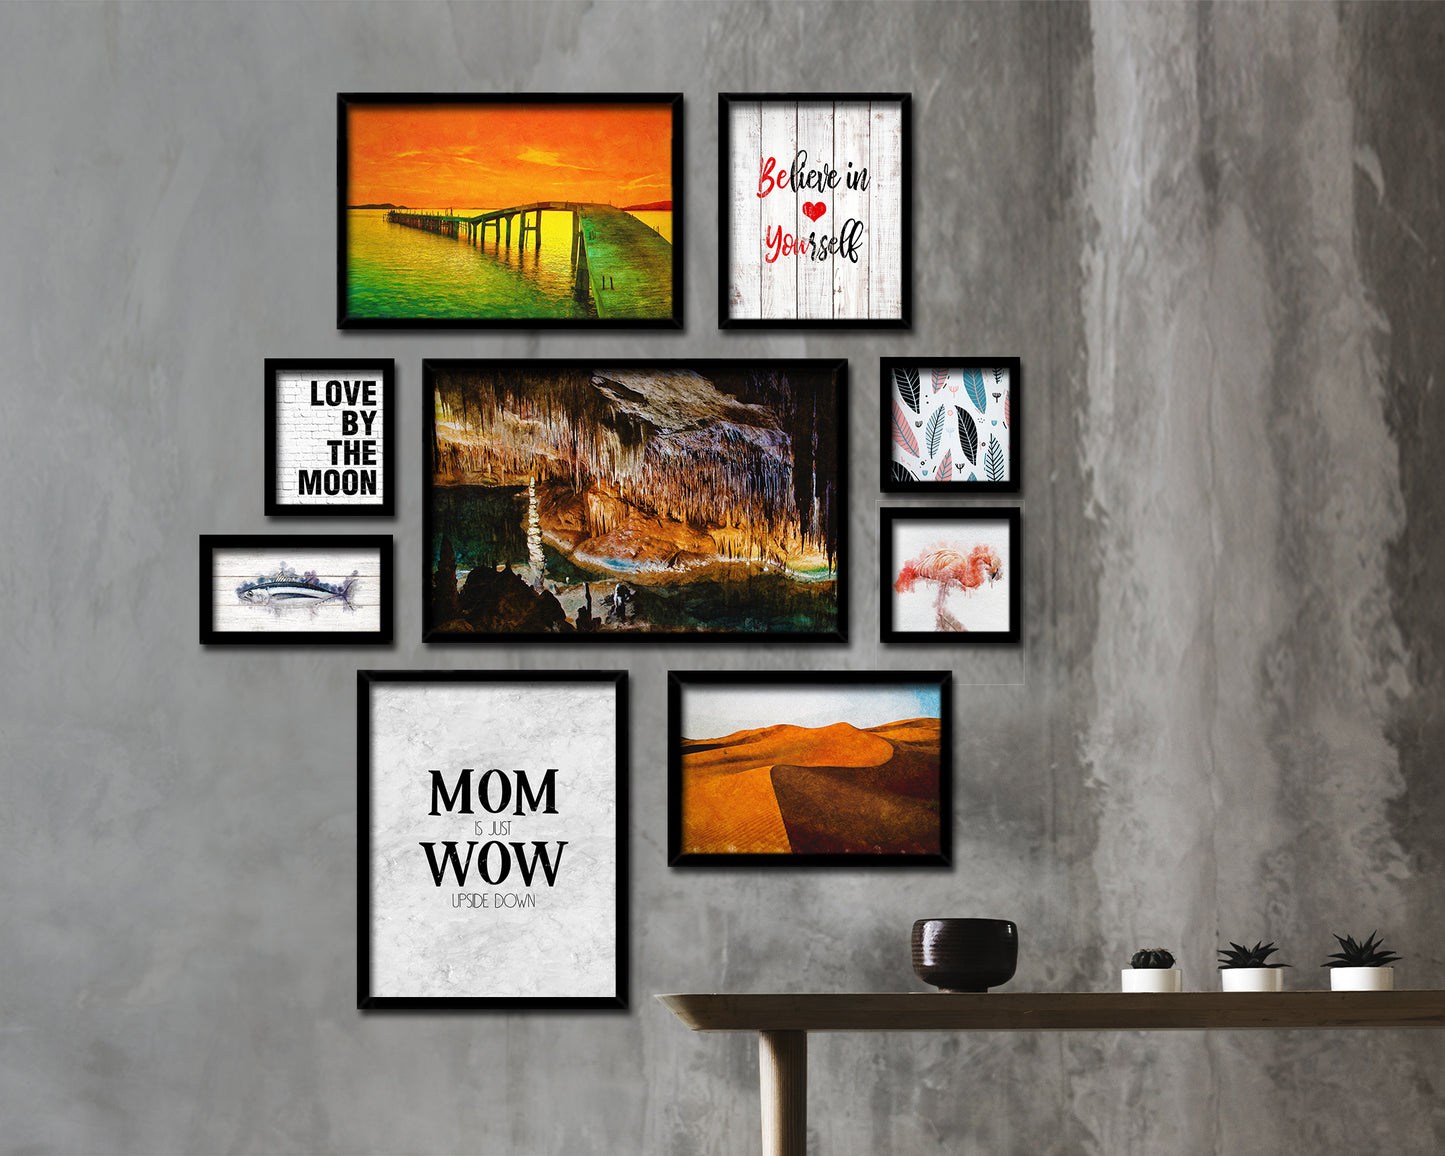 Mom is just wow upside down Quote Framed Print Wall Art Decor Gifts